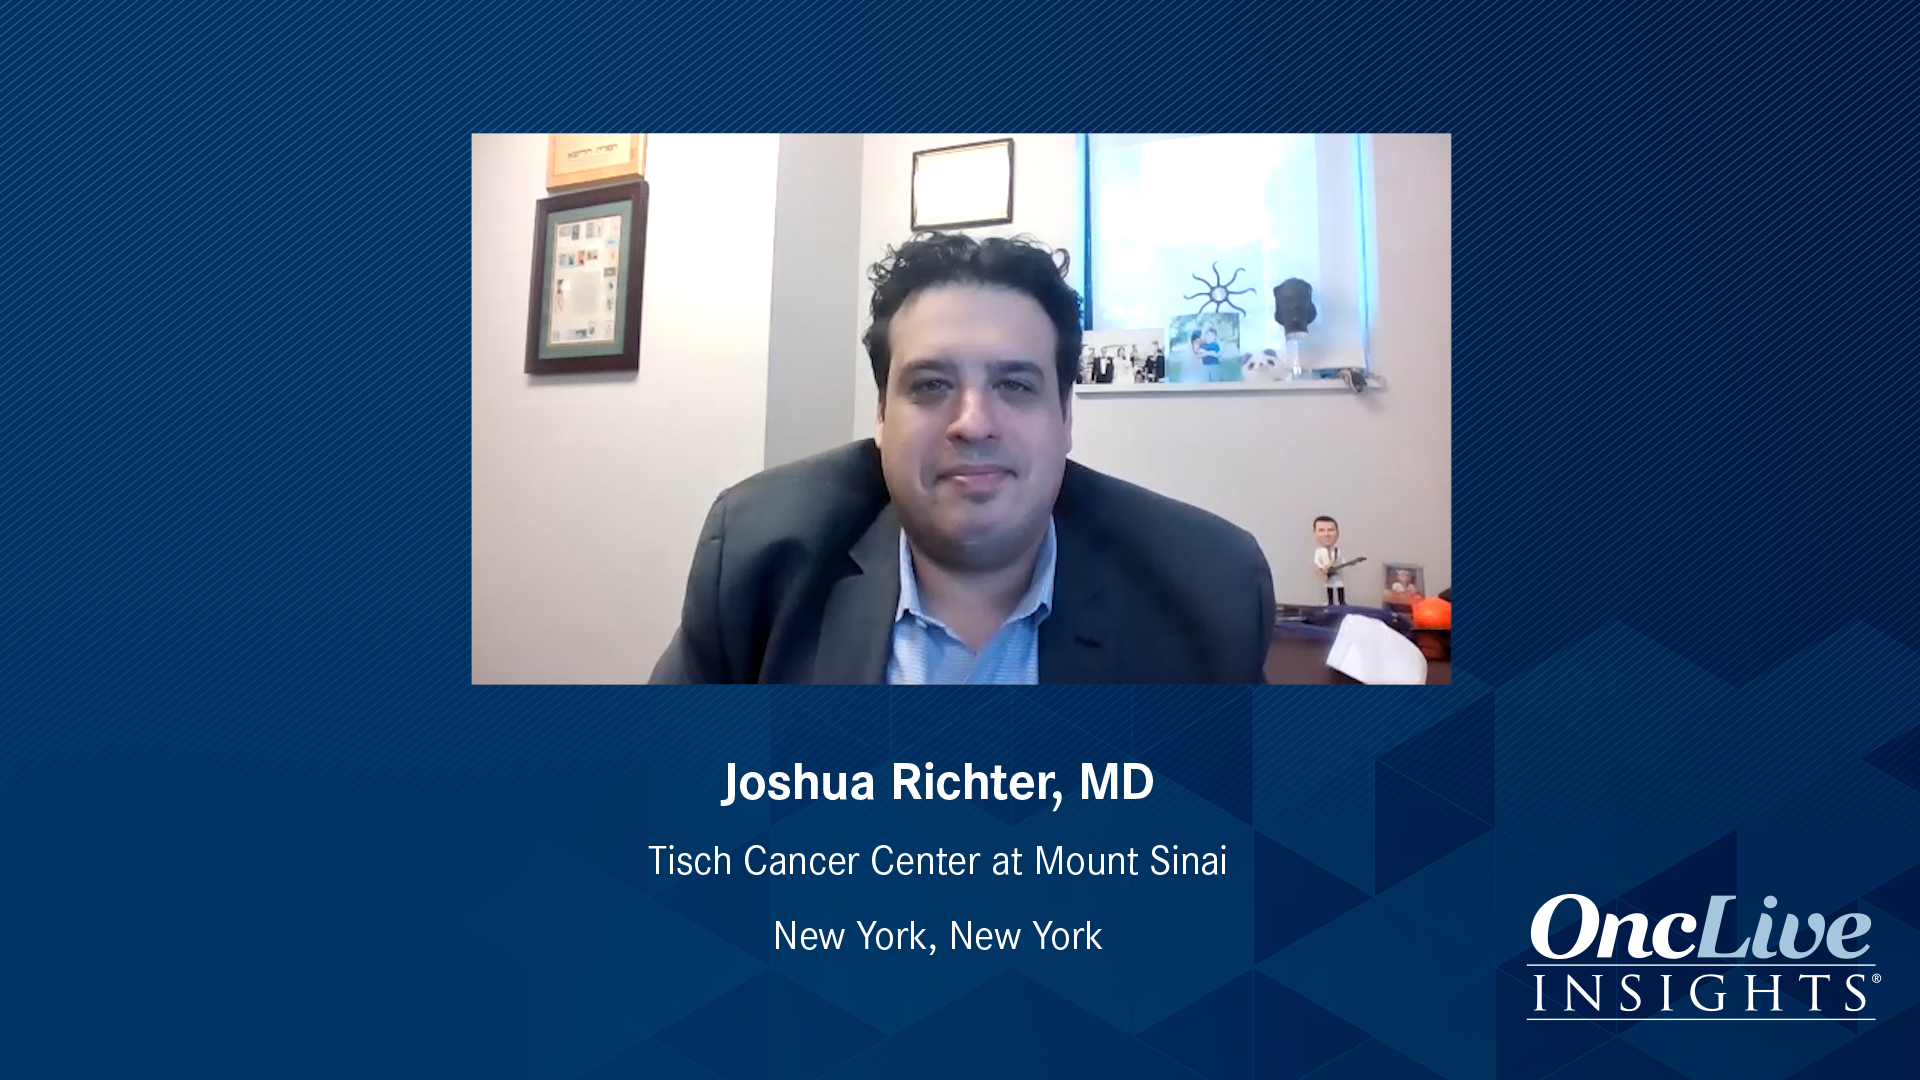 Recent Updates in Relapsed or Refractory Multiple Myeloma